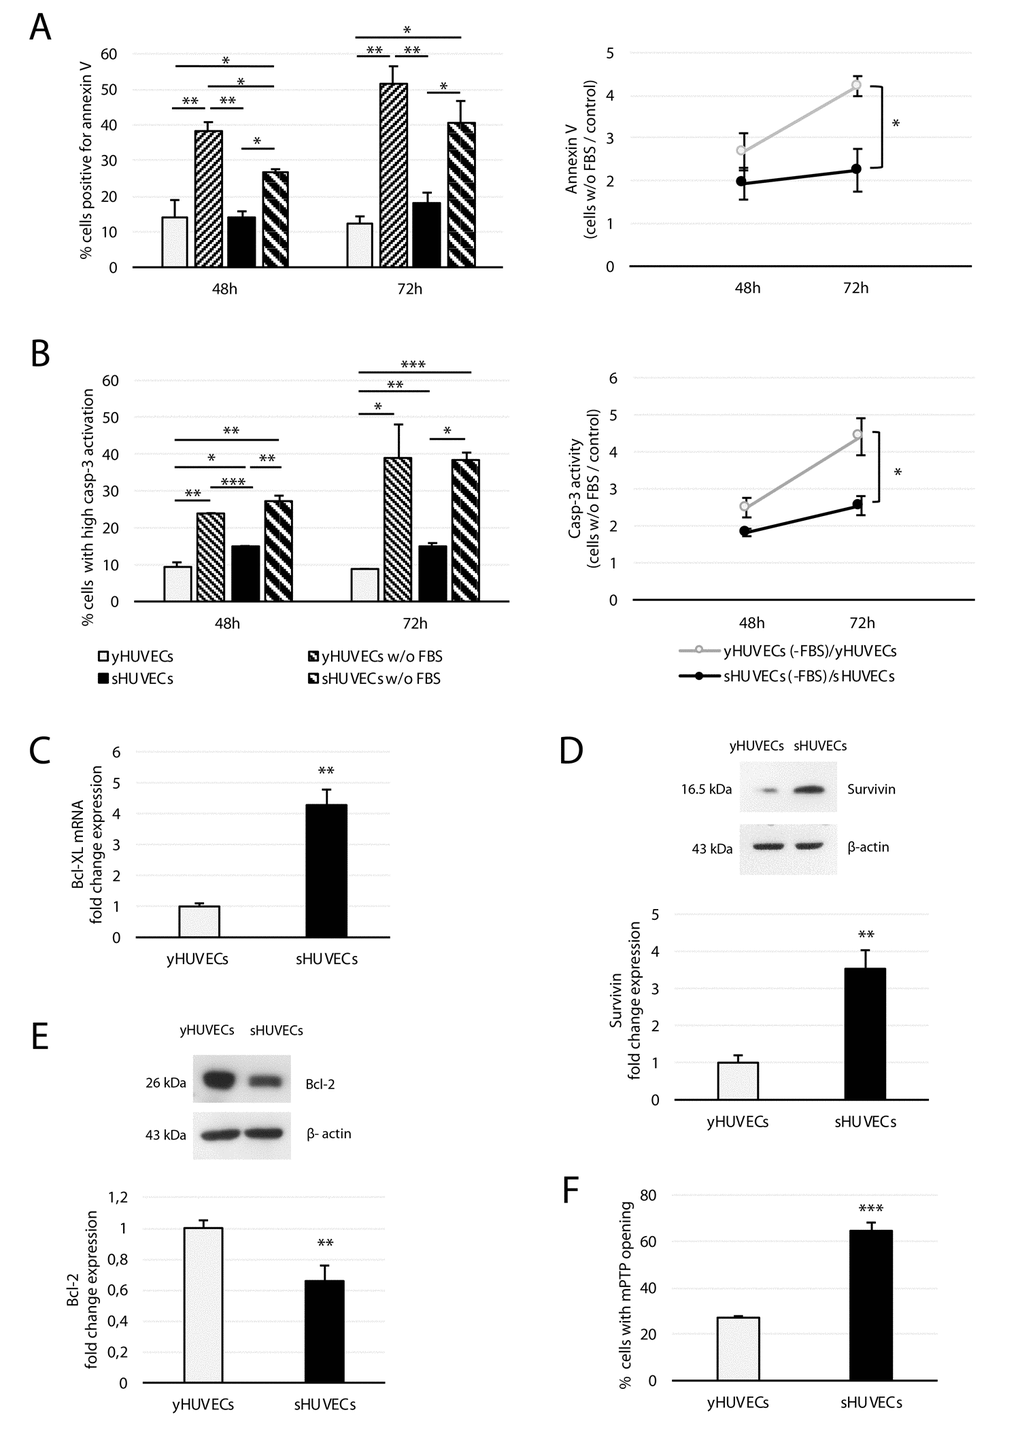 Effect of FBS deprivation on young and senescent HUVECs. yHUVECs and sHUVECs were cultured for 48 (48h) or 72 (72h) hours with or without (w/o) FBS. Annexin V positivity and casp-3 activation were analyzed by flow cytometry. (A) Percentage of annexin V-positive cells (left) and ratio of annexin V-positive apoptotic cells among yHUVECs and sHUVECs w/o FBS to their control (with FBS) (right). (B) Percentage of cells with active casp-3 (left); ratio of yHUVECs or sHUVECs w/o FBS with activated casp-3 to control cells (right). (C) Bcl-xL mRNA fold change in yHUVECs and sHUVECs. (D) Western blot and densitometric analysis of Survivin expression in yHUVECs and sHUVECs. (E) Western blot and densitometric analysis of Bcl-2 in yHUVECs and sHUVECs. (F) Percentage of HUVECs showing mPTP opening. Protein expression values are reported as Bcl-2 and Survivin fold change in sHUVECs vs yHUVECs. Data are normalized to β-actin protein. Data are mean ± SD of three independent experiments. * t -test p 